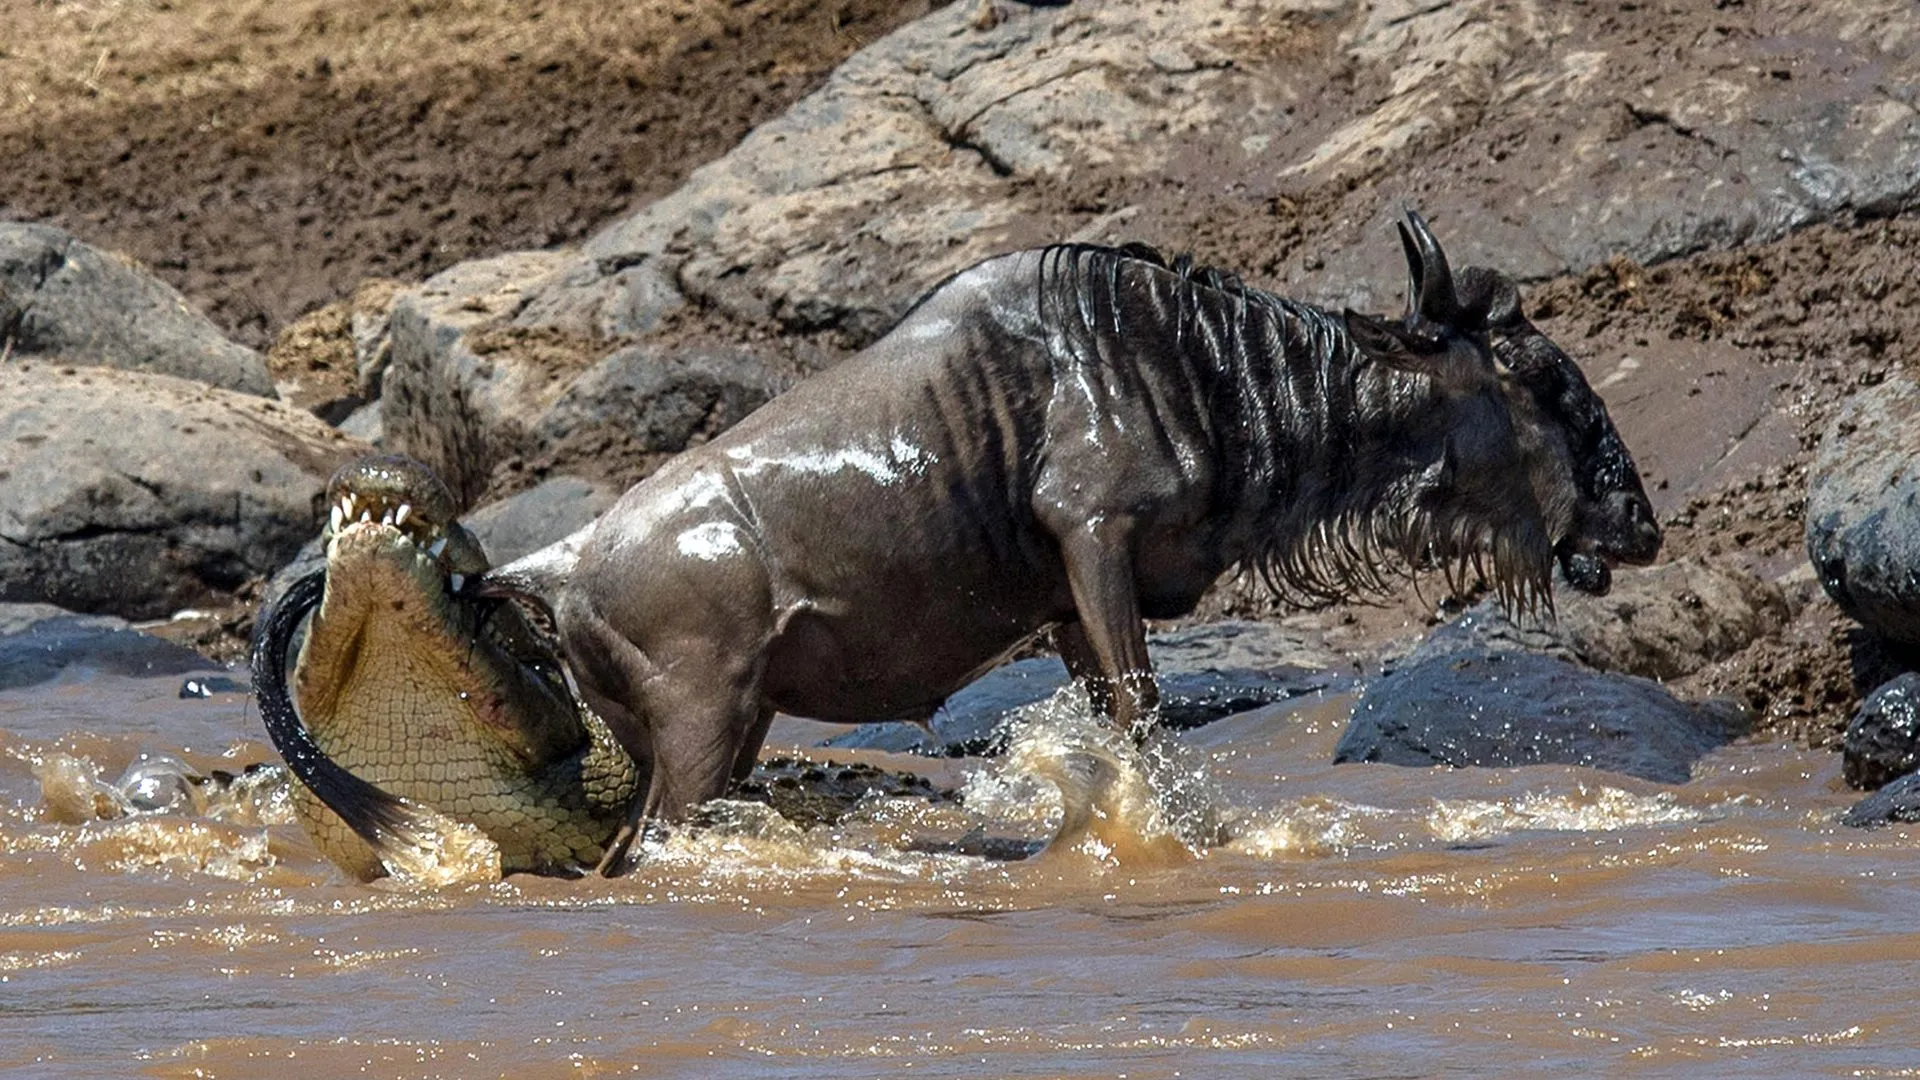 Tracking Wildebeest migration Kenya & Tanzania - A Nile croc biting a wildebeest’s tail